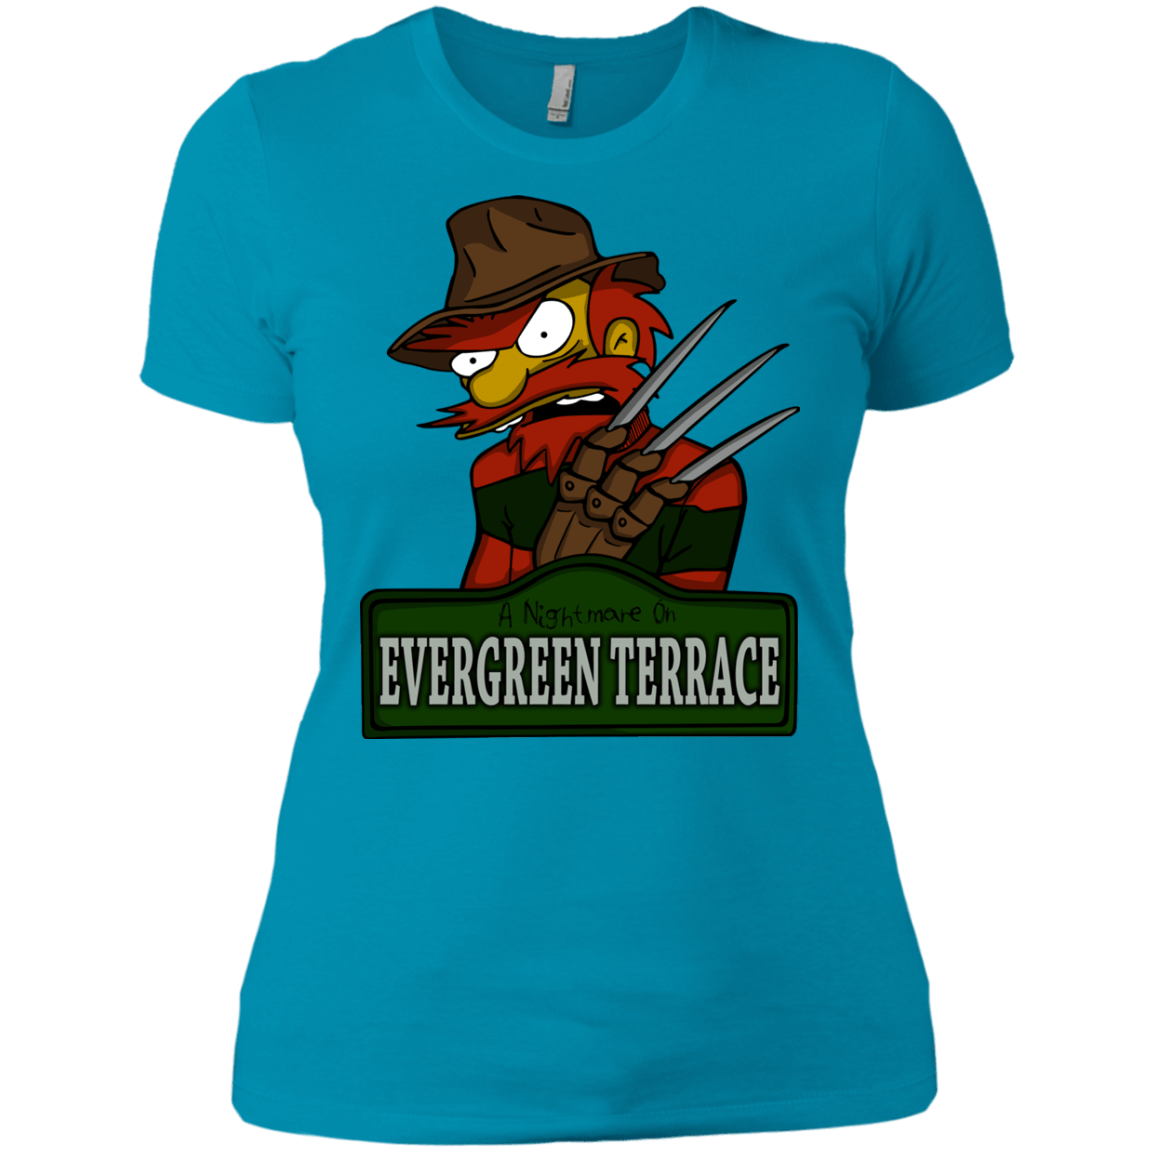 T-Shirts Turquoise / X-Small A Nightmare on Springfield Sin Tramas Women's Premium T-Shirt